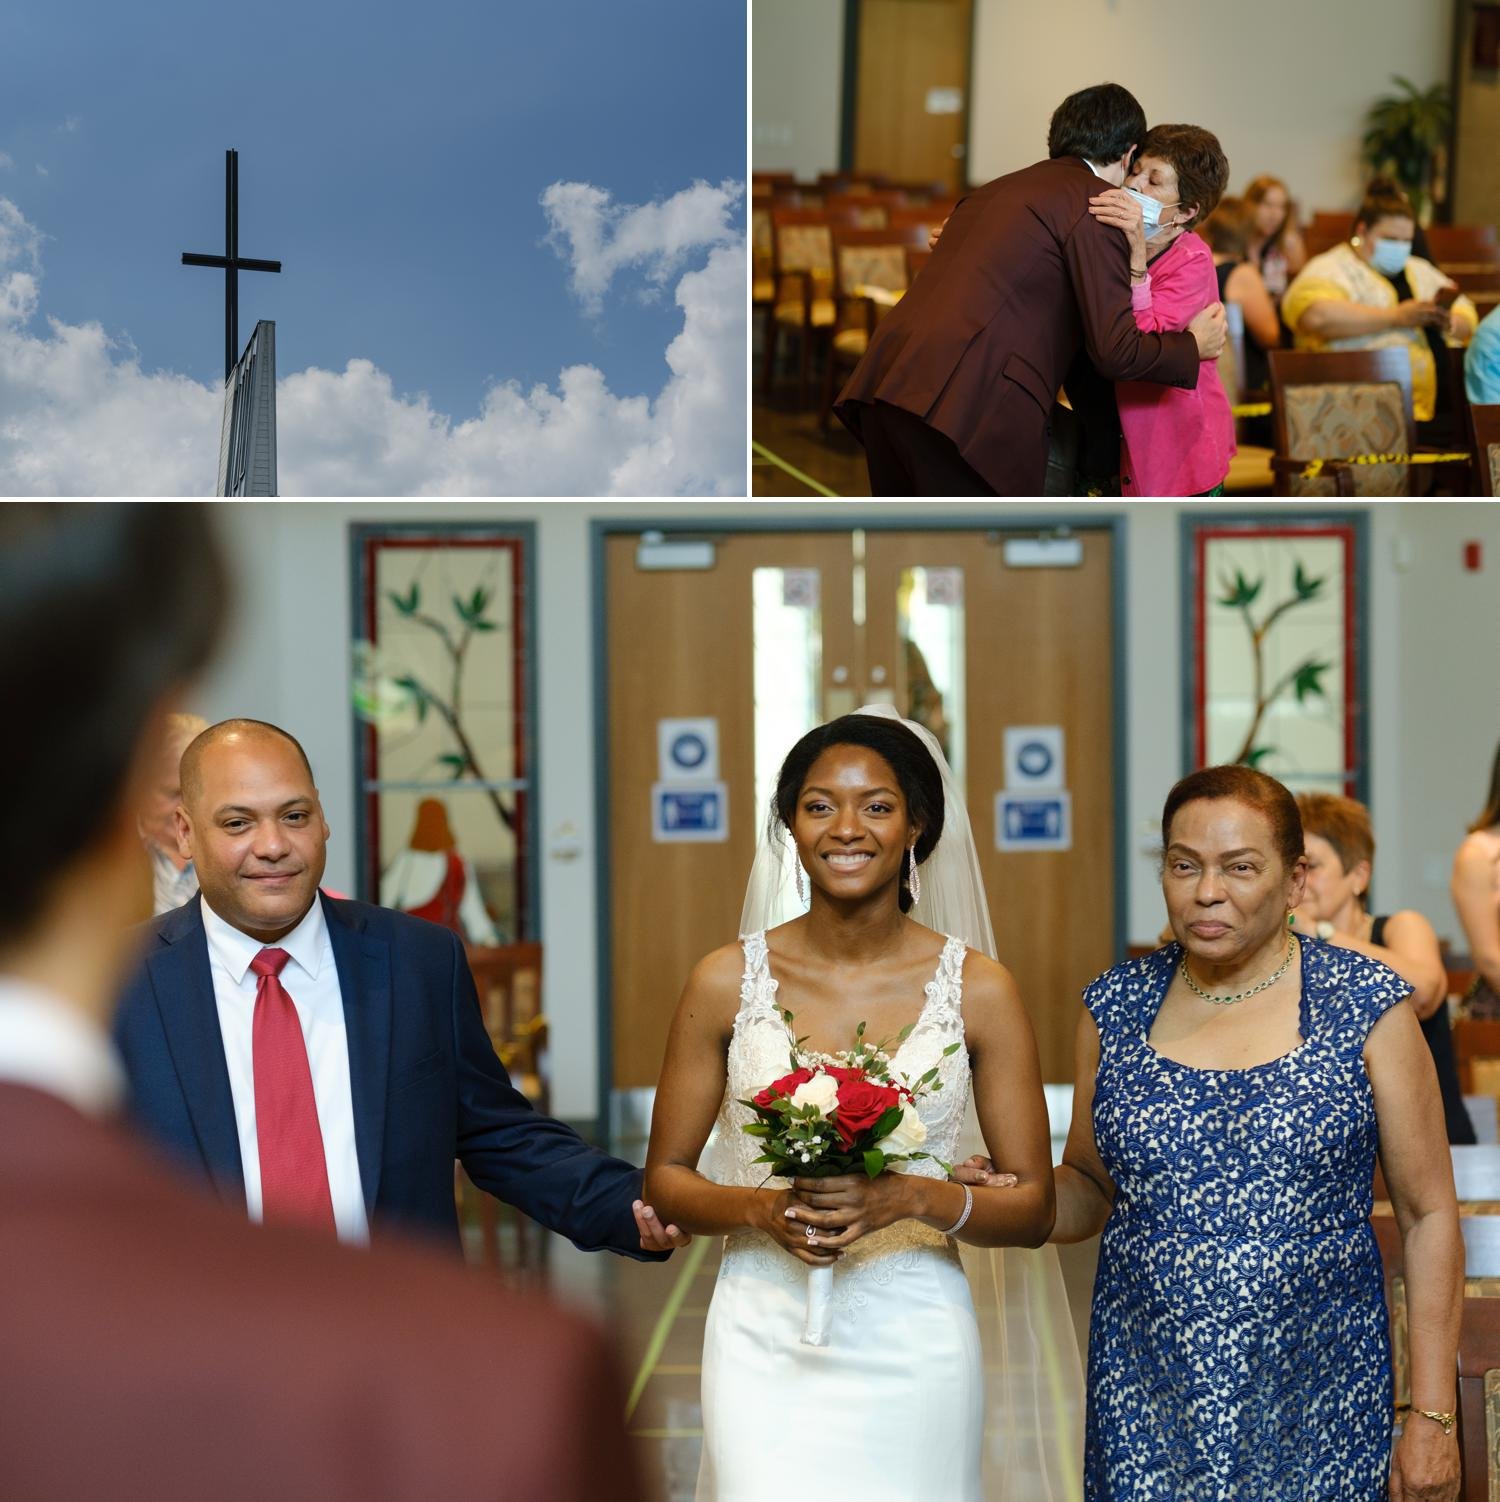 photos of a bride and groom getting married at a church